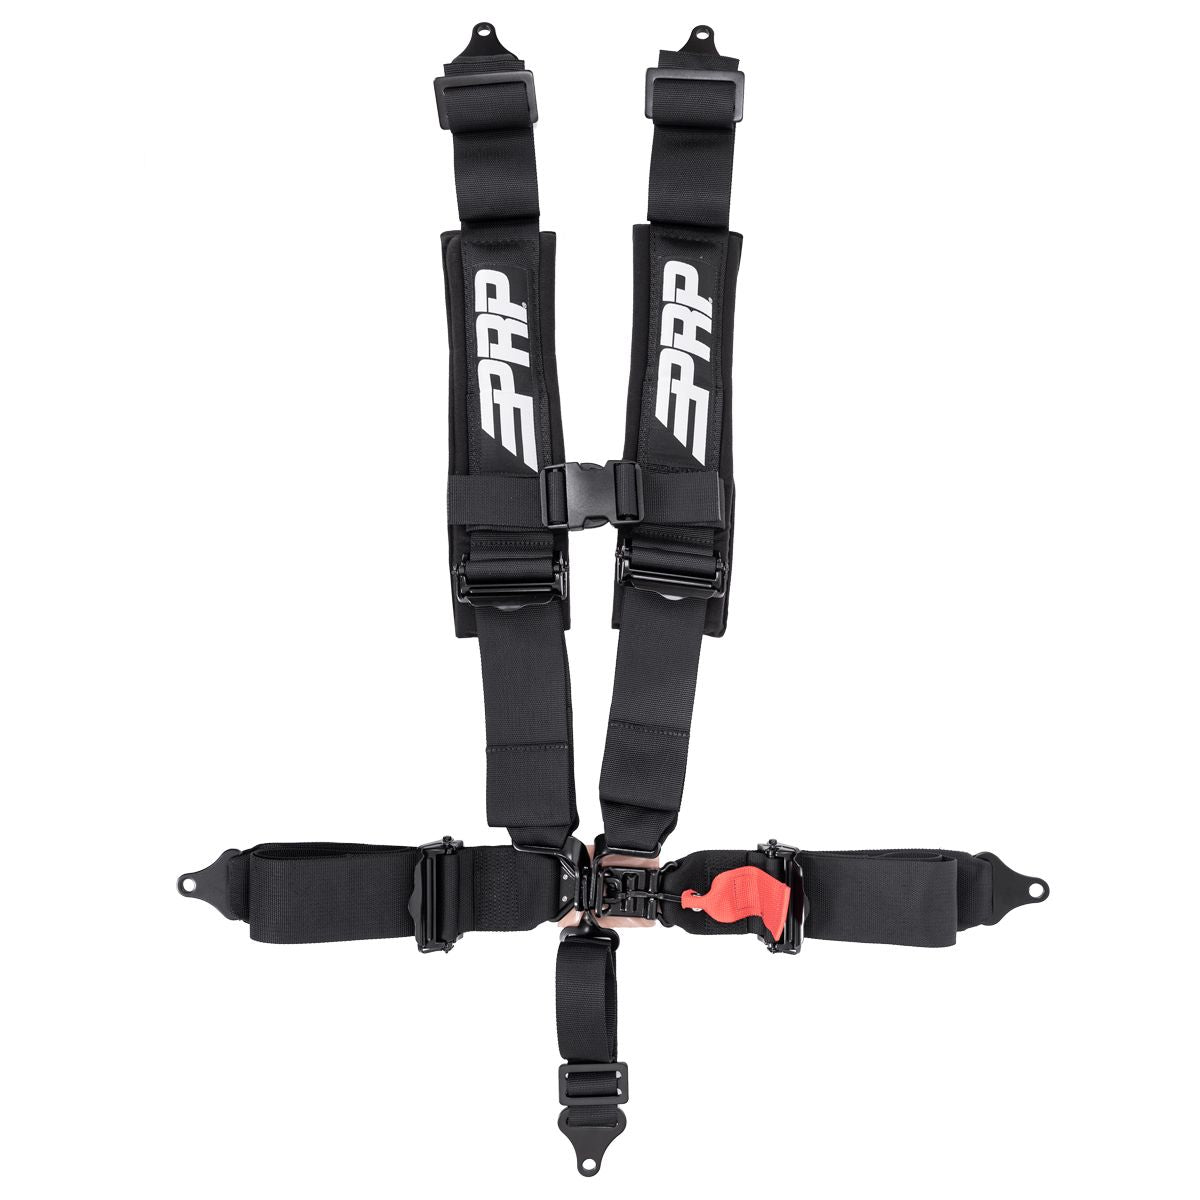 PRP 5.3 Harness -5 Point Harness w/ 3 In. Belts/ Removable Pads on Shoulder